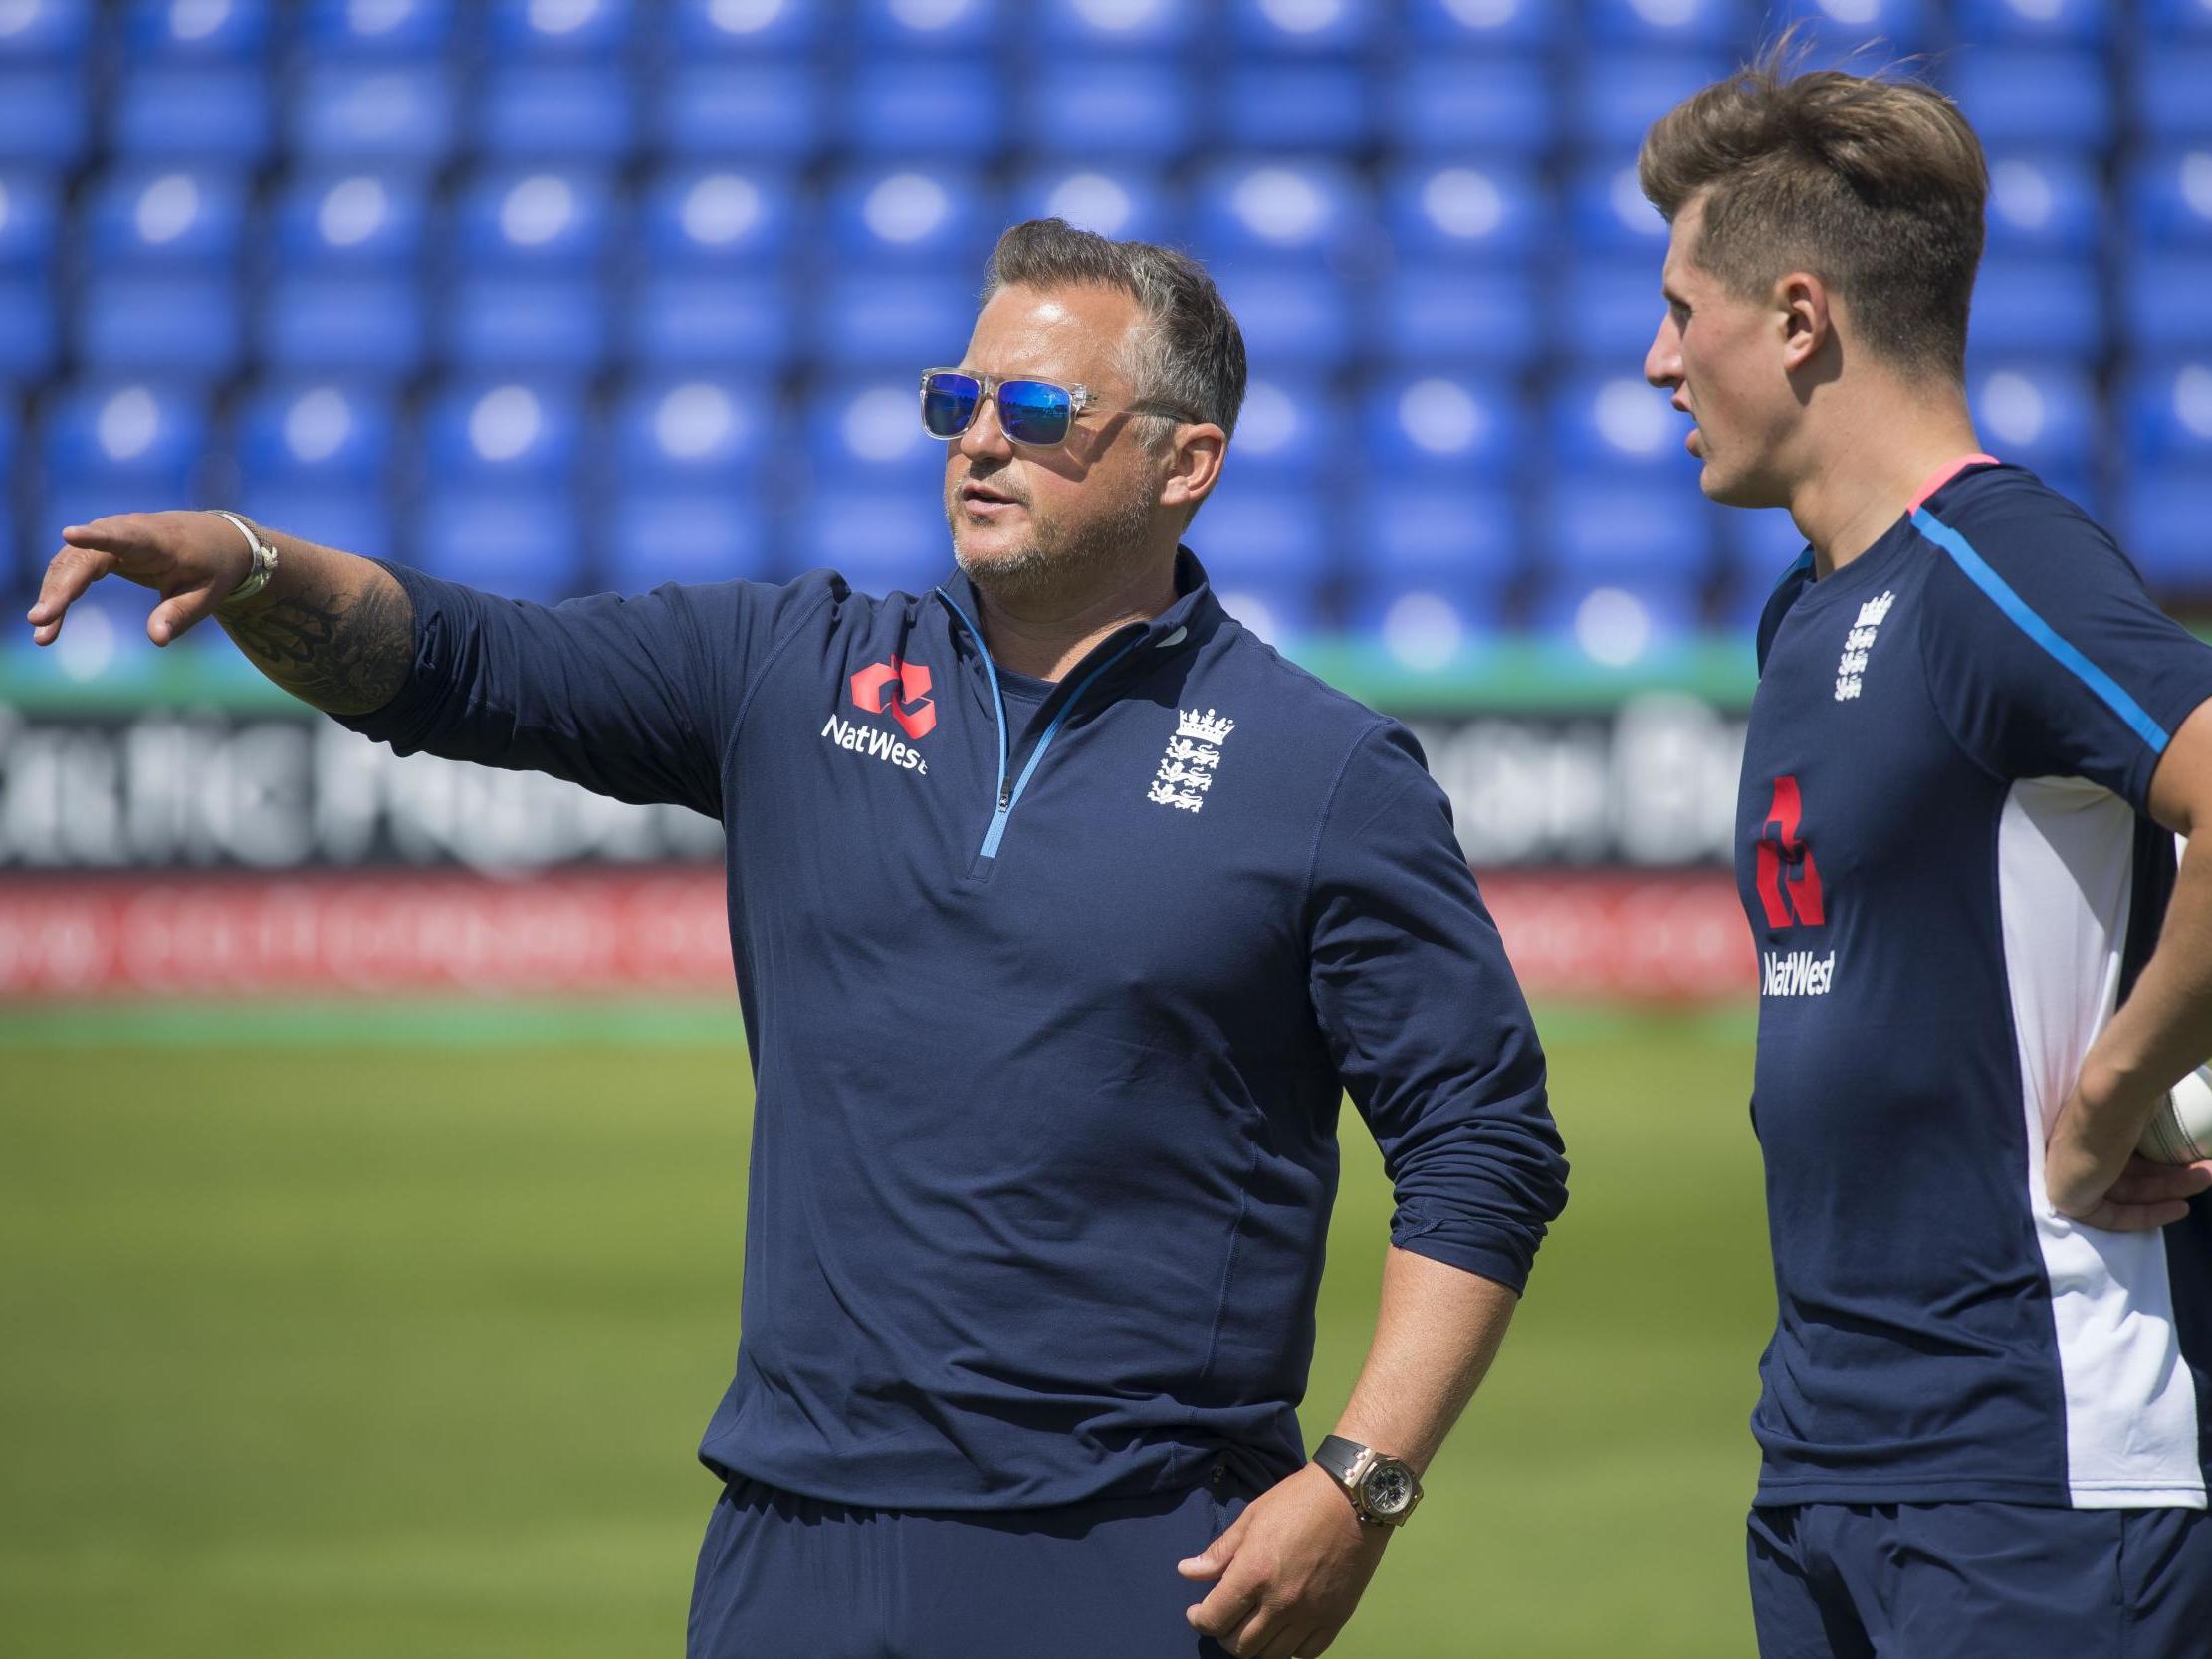 Darren Gough has been appointed England’s fast bowling consultant